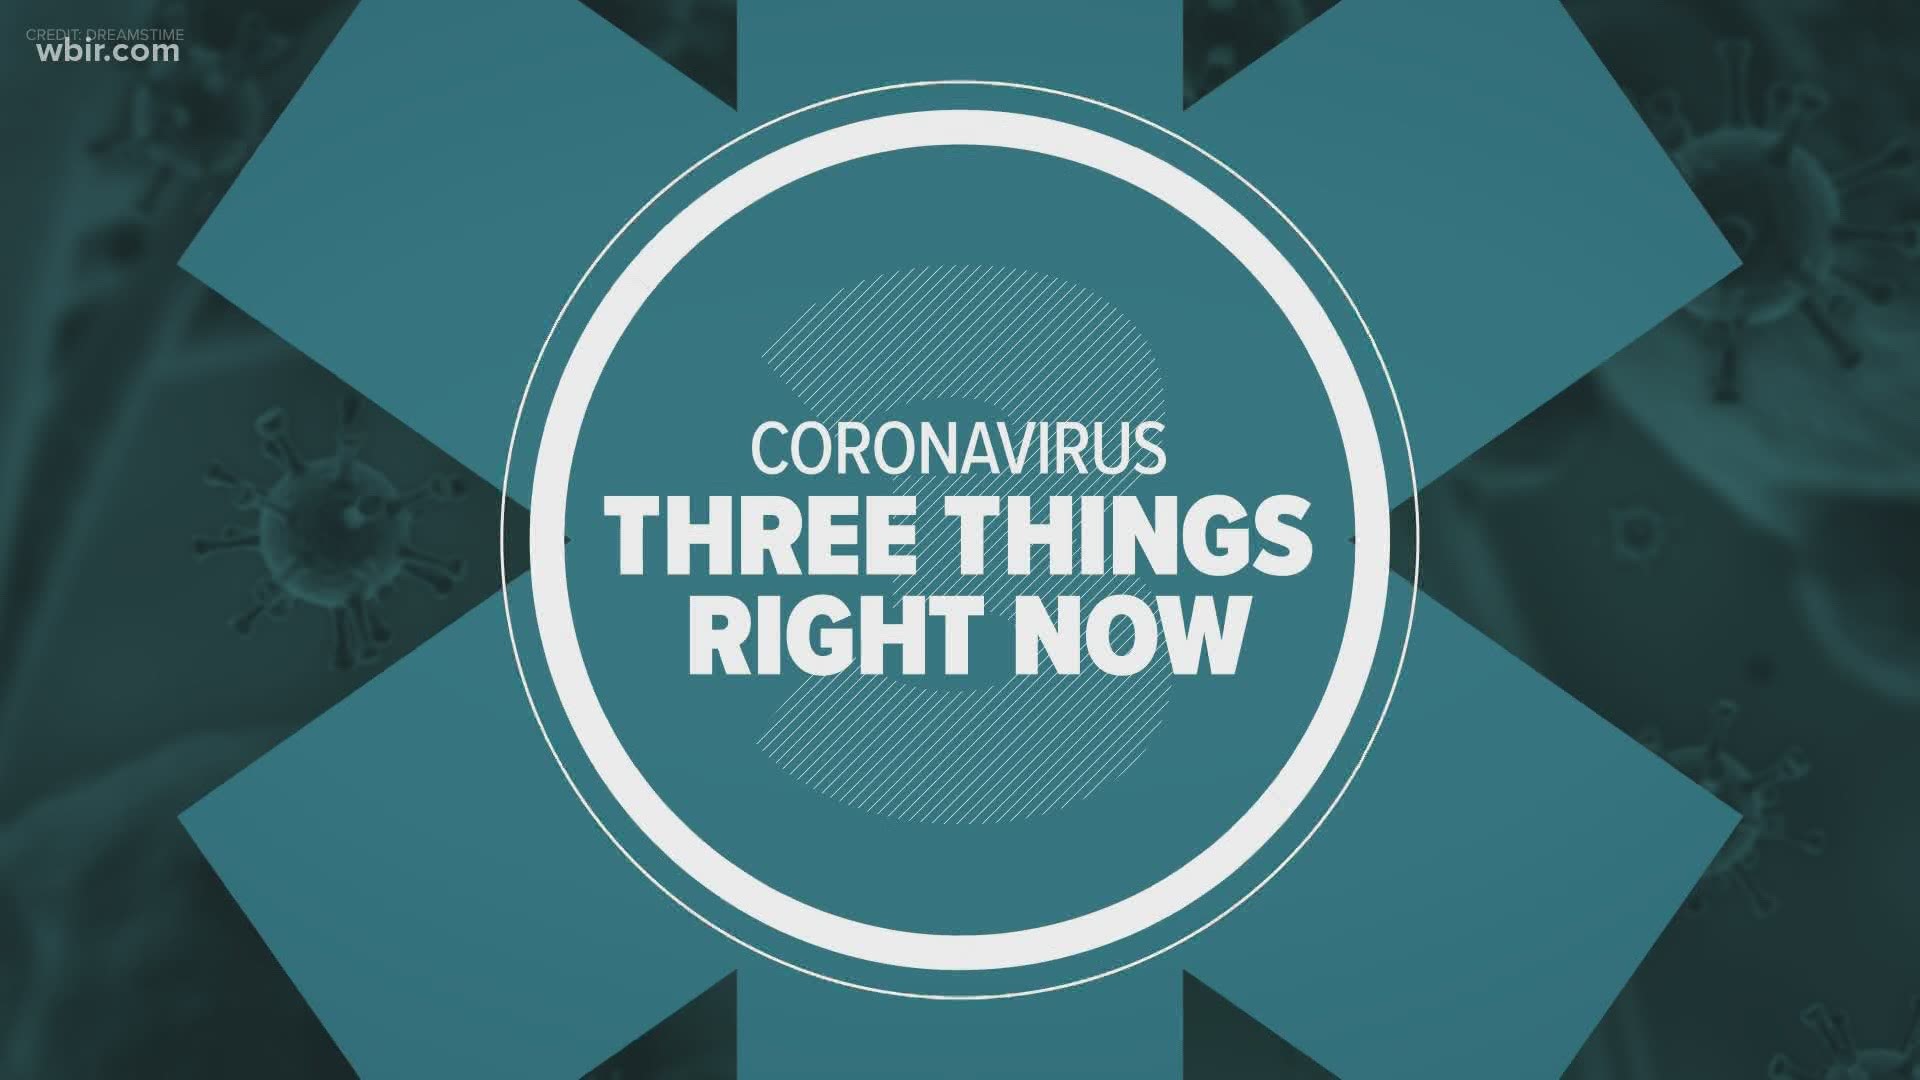 Here are 3 things you should know about the coronavirus for June 26.